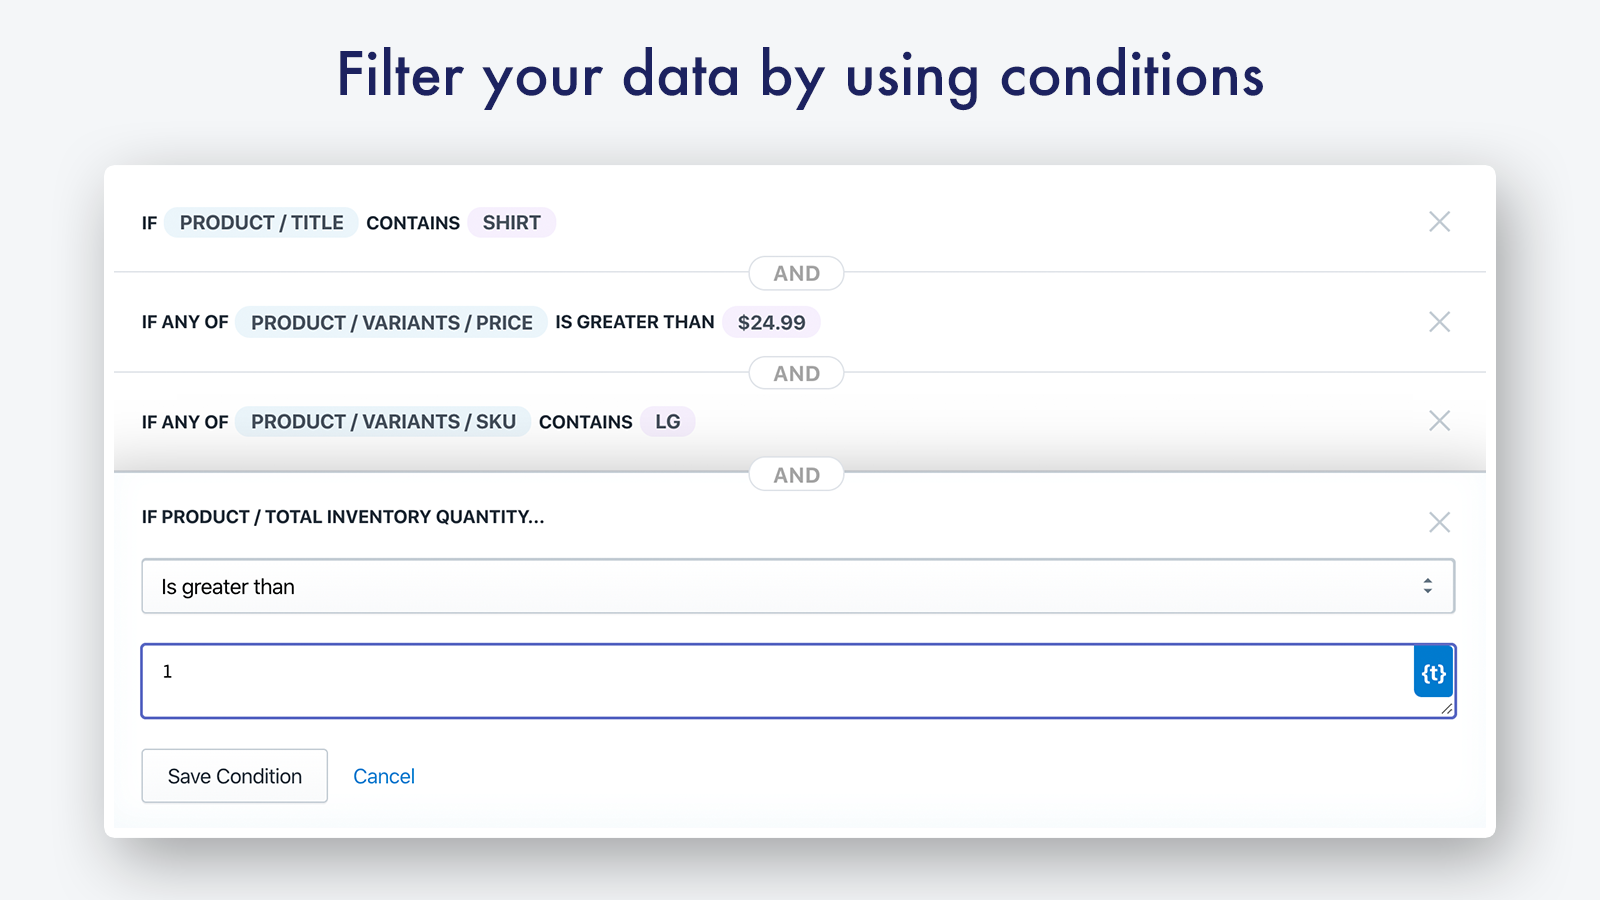 Filter data by using conditions